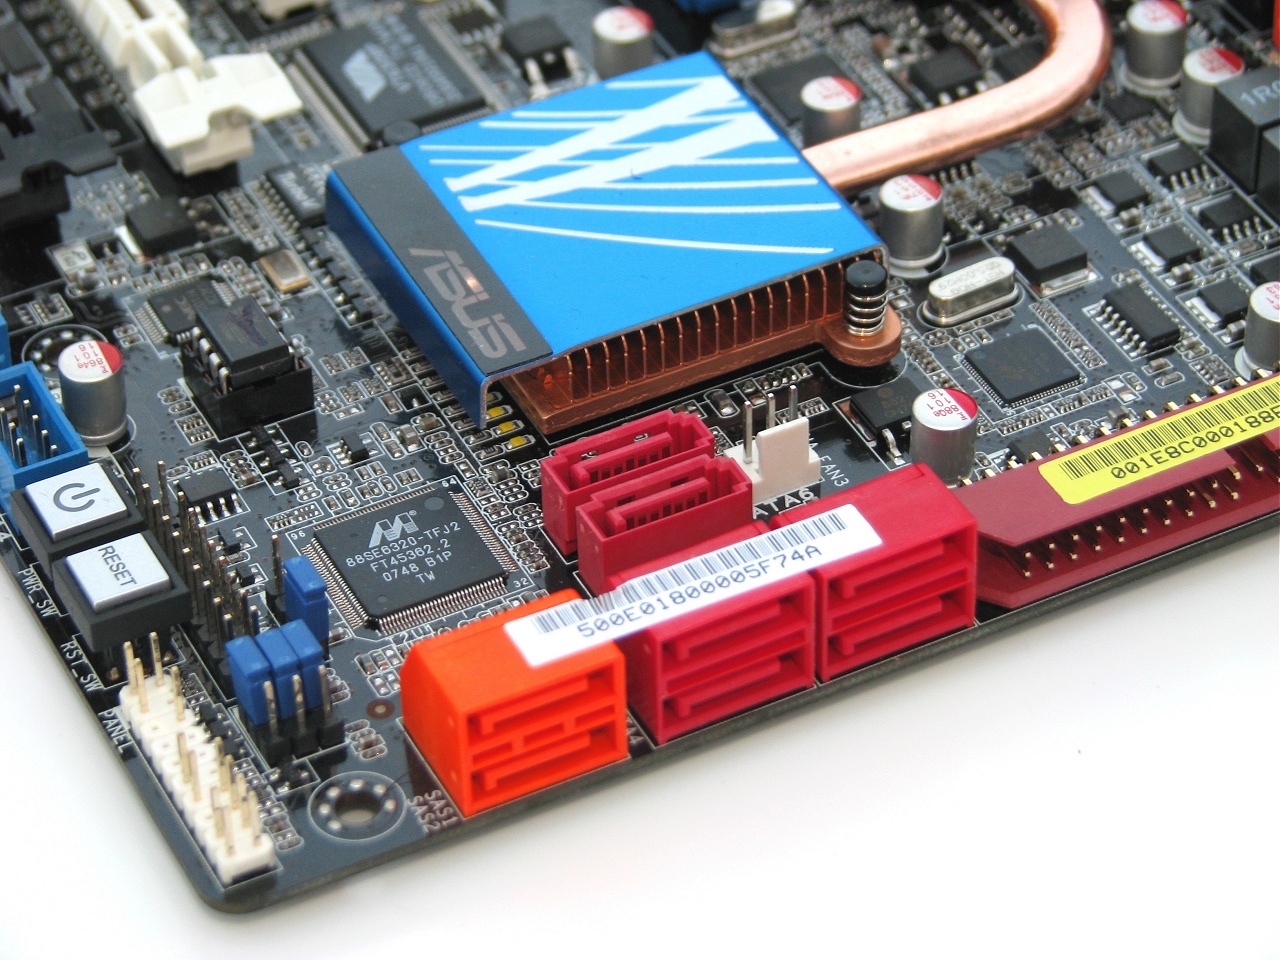 Asus P6T Deluxe Intel X58 motherboard review Photo Gallery - TechSpot